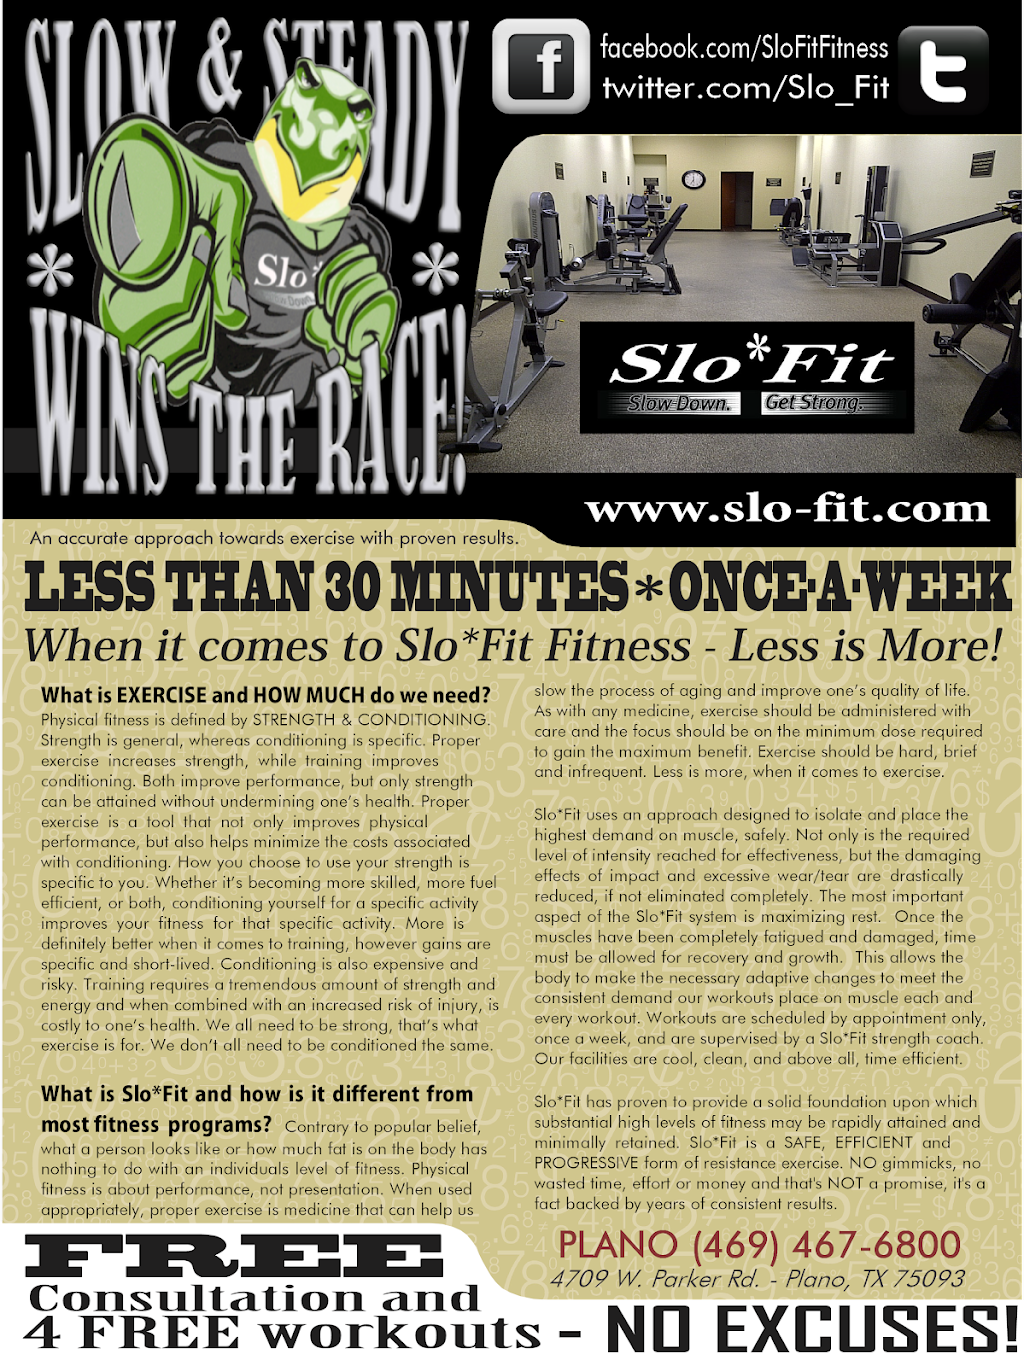 Slo Fit Fitness | 4709 Parker Rd # 480, Plano, TX 75093, USA | Phone: (469) 467-6800